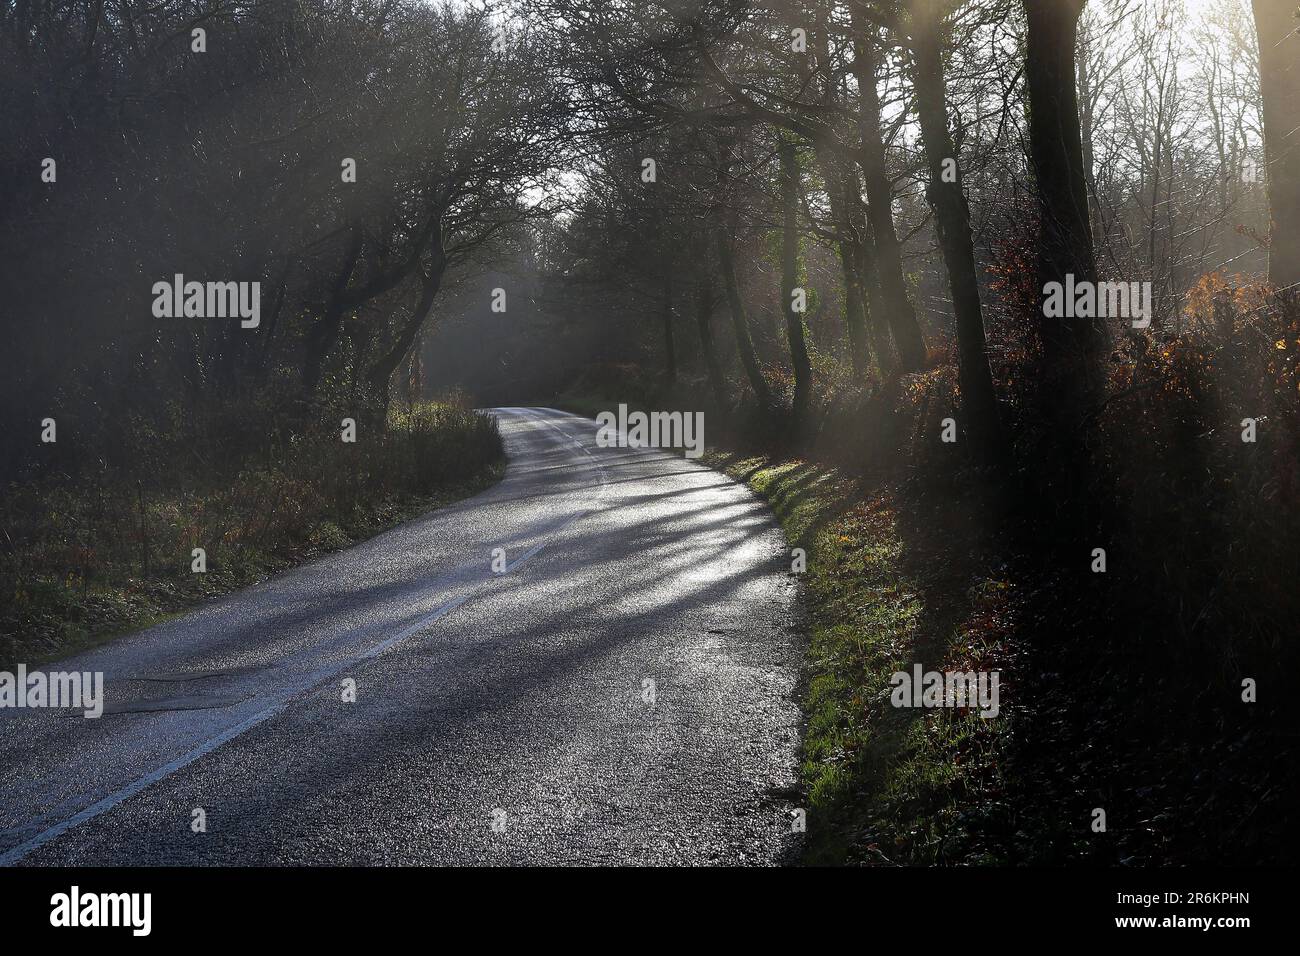 A misty December morning as the sun shines through the trees along the road to Stoke Climsland... Stock Photo